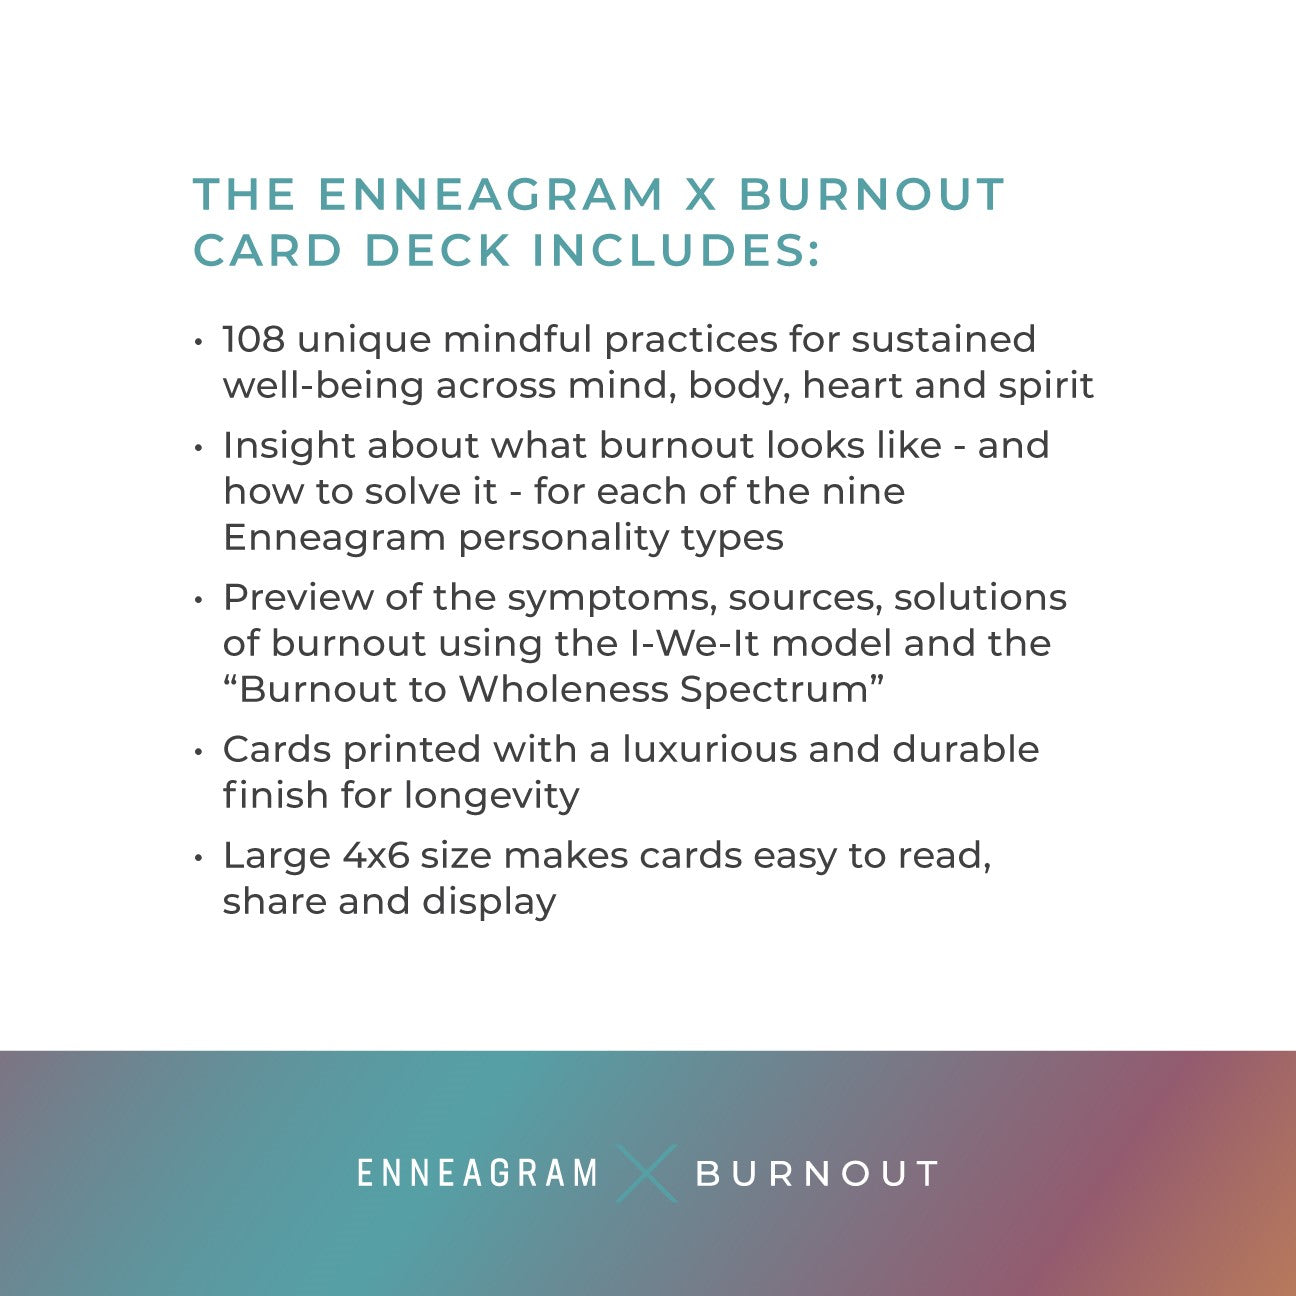 Enneagram X Burnout Card Deck: 108 Unique Mindful Practices for Sustained Well-being in Mind, Body, Heart, and Spirit